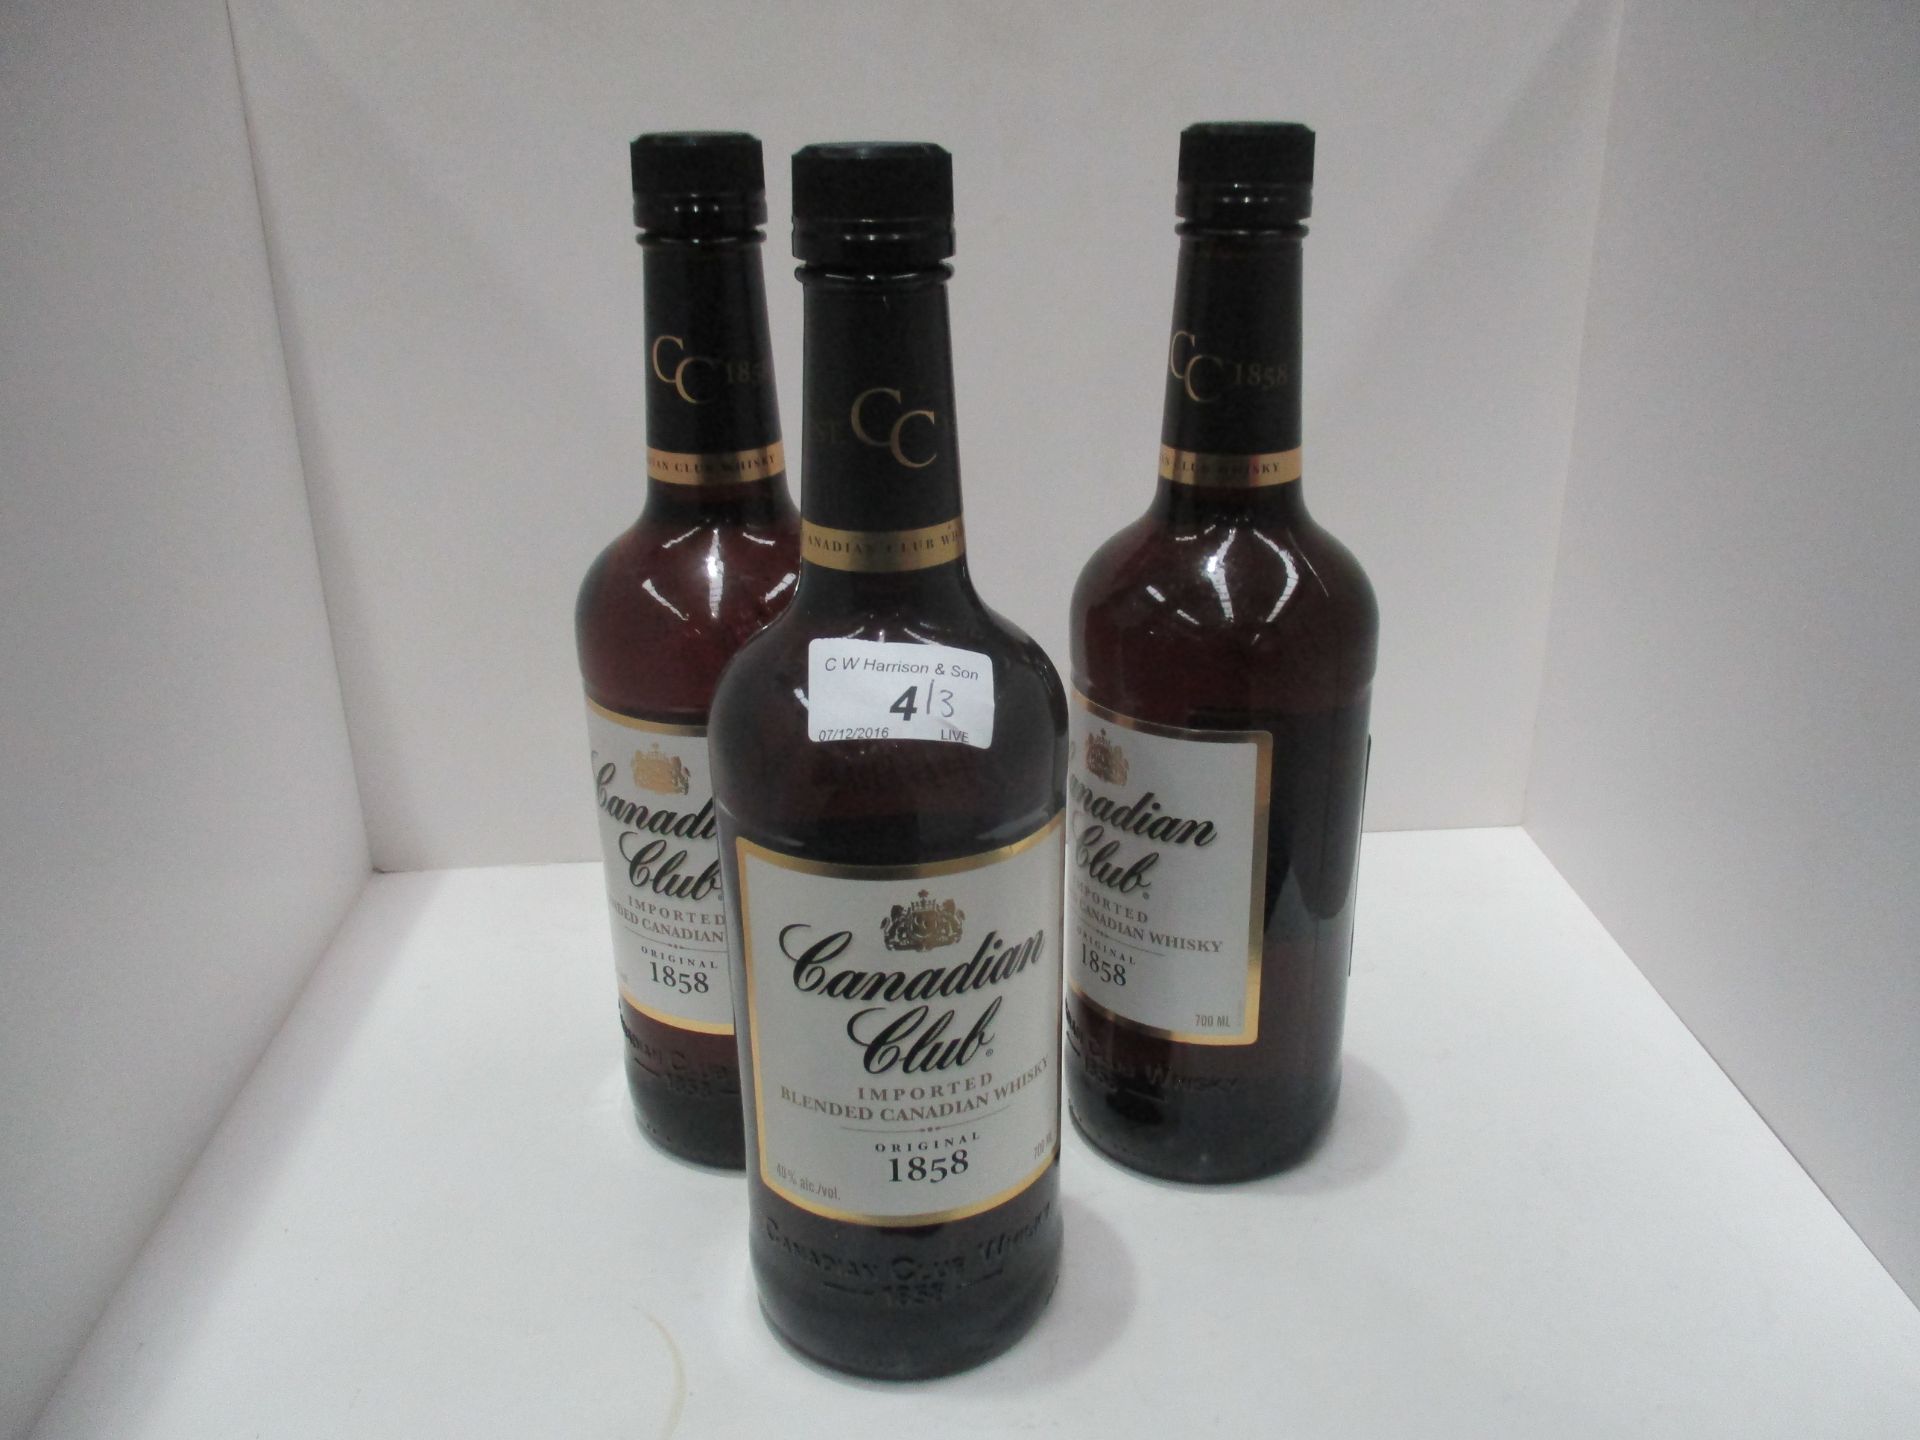 3 bottles of 700ml Canadian Club Imported blended Canadian Whisky